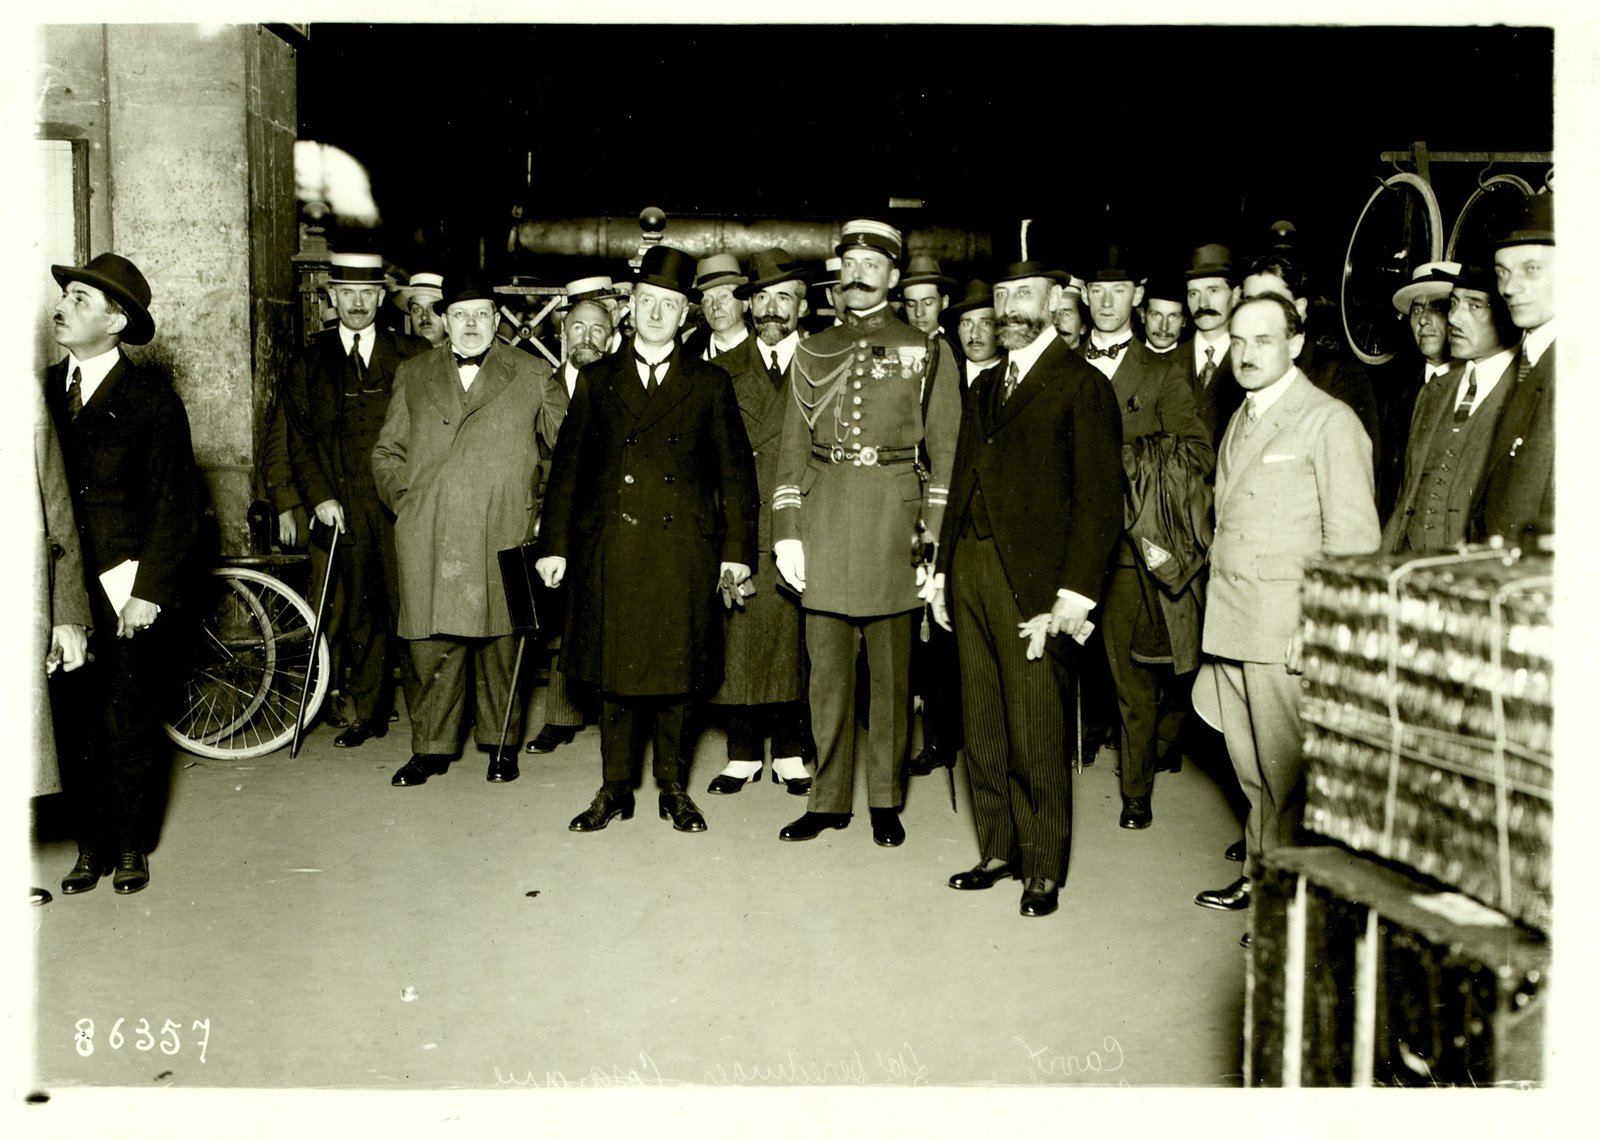 Image - President WT Cosgrave, Attorney-General Hugh Kennedy and the rest of the Irish delegation arriving in Geneva, September 1923 (Credit: KEN11. National Library of Ireland)